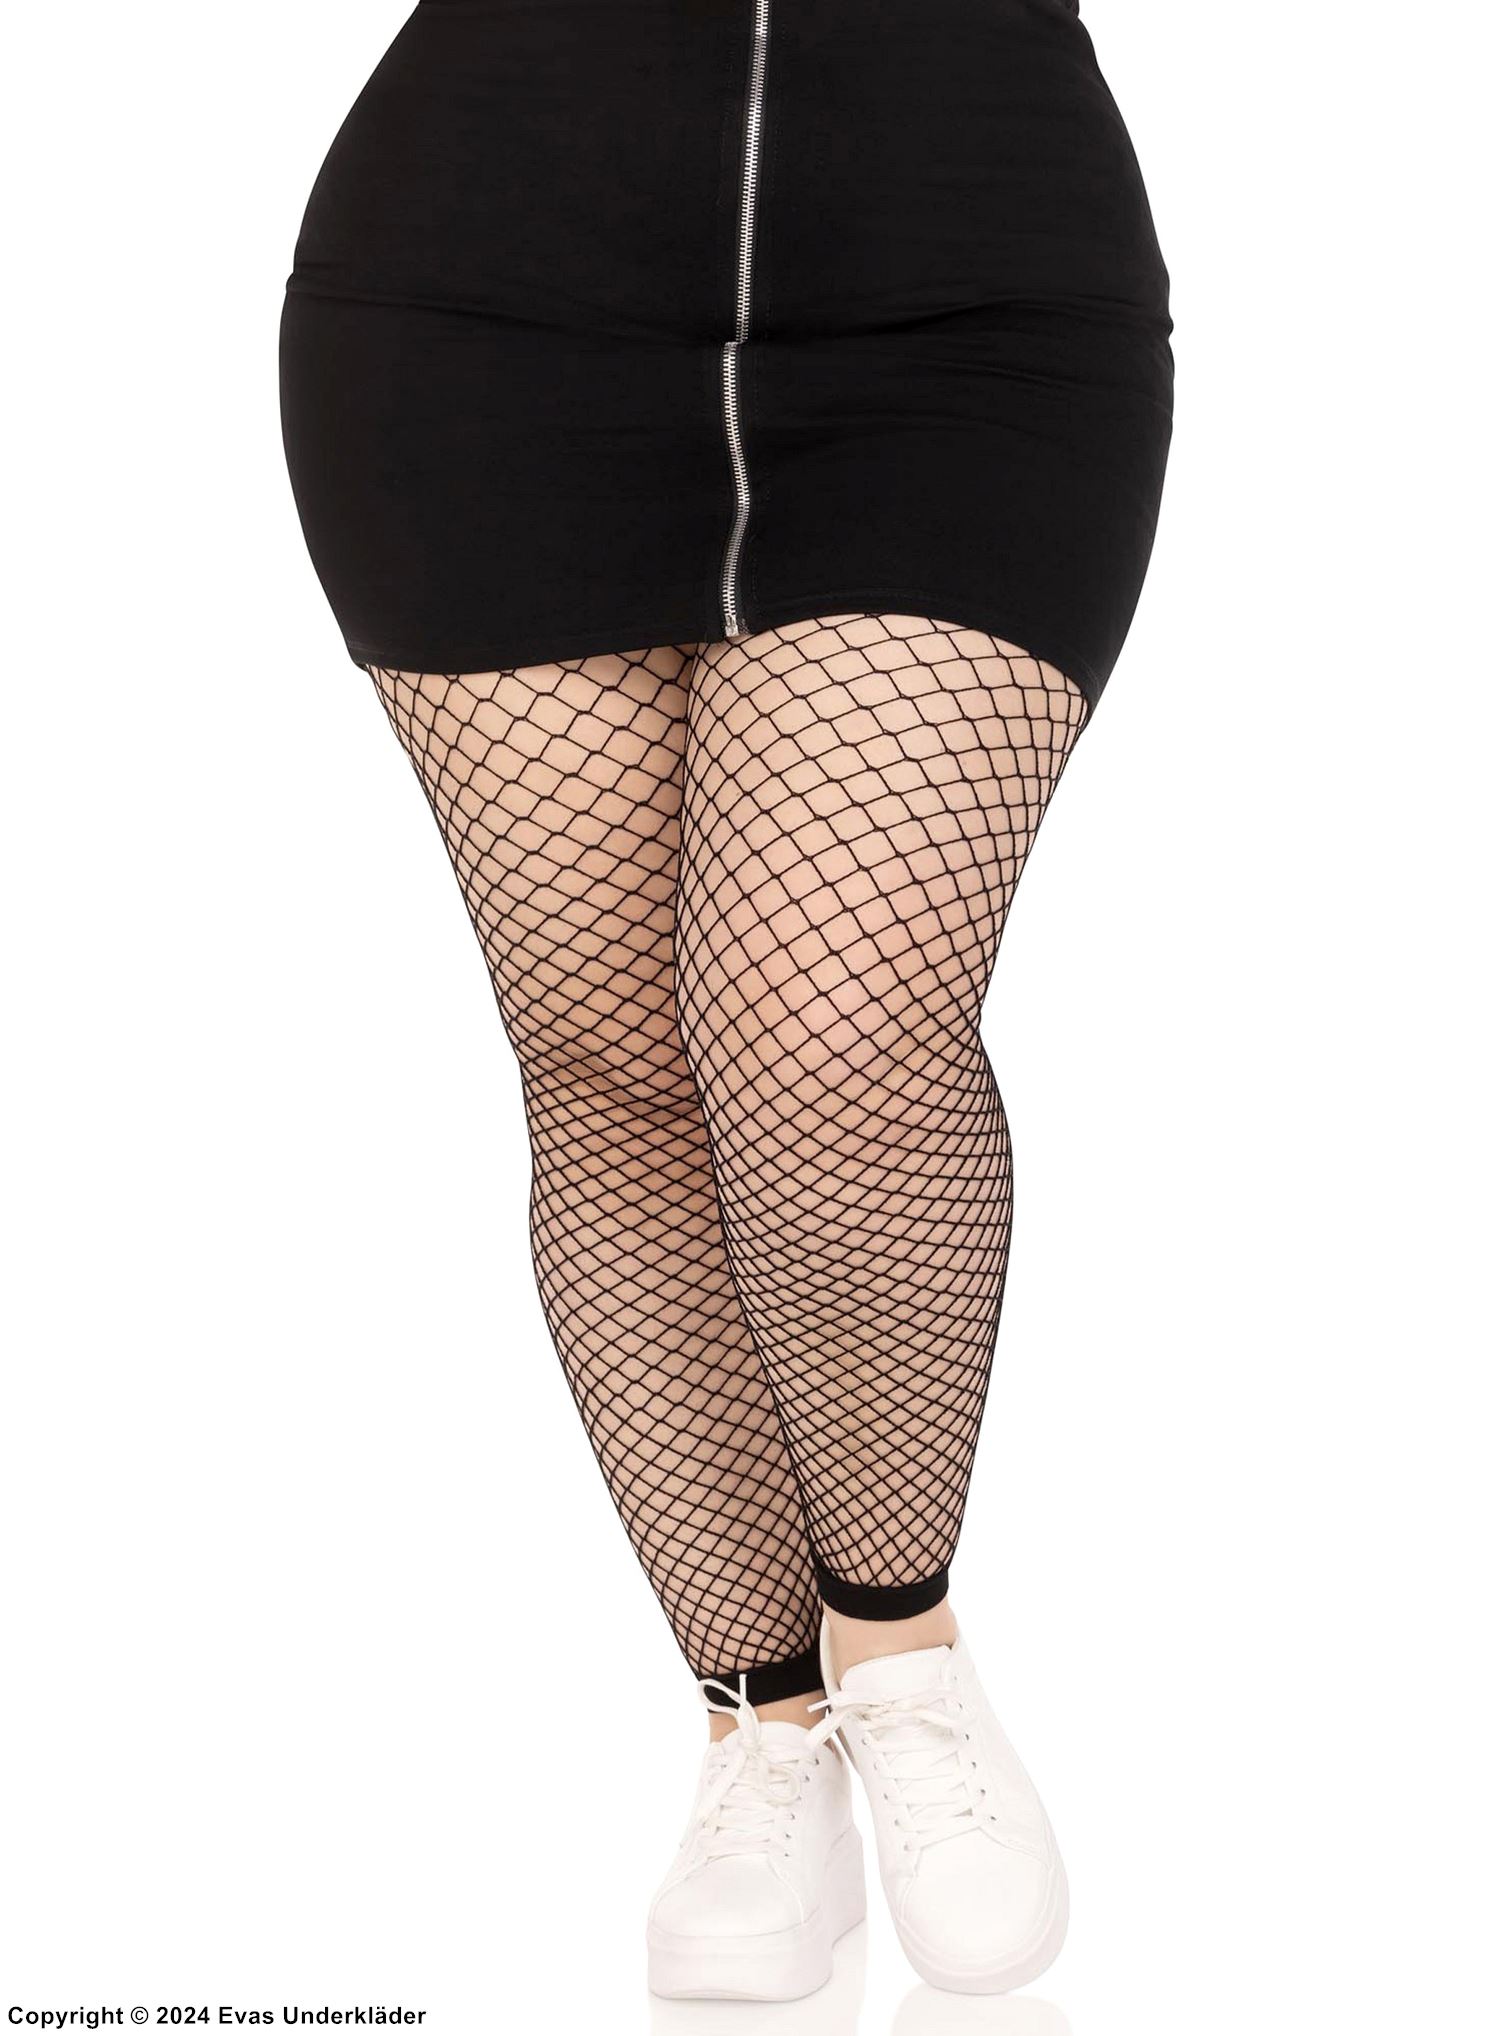 Tights / stockings, plus size 